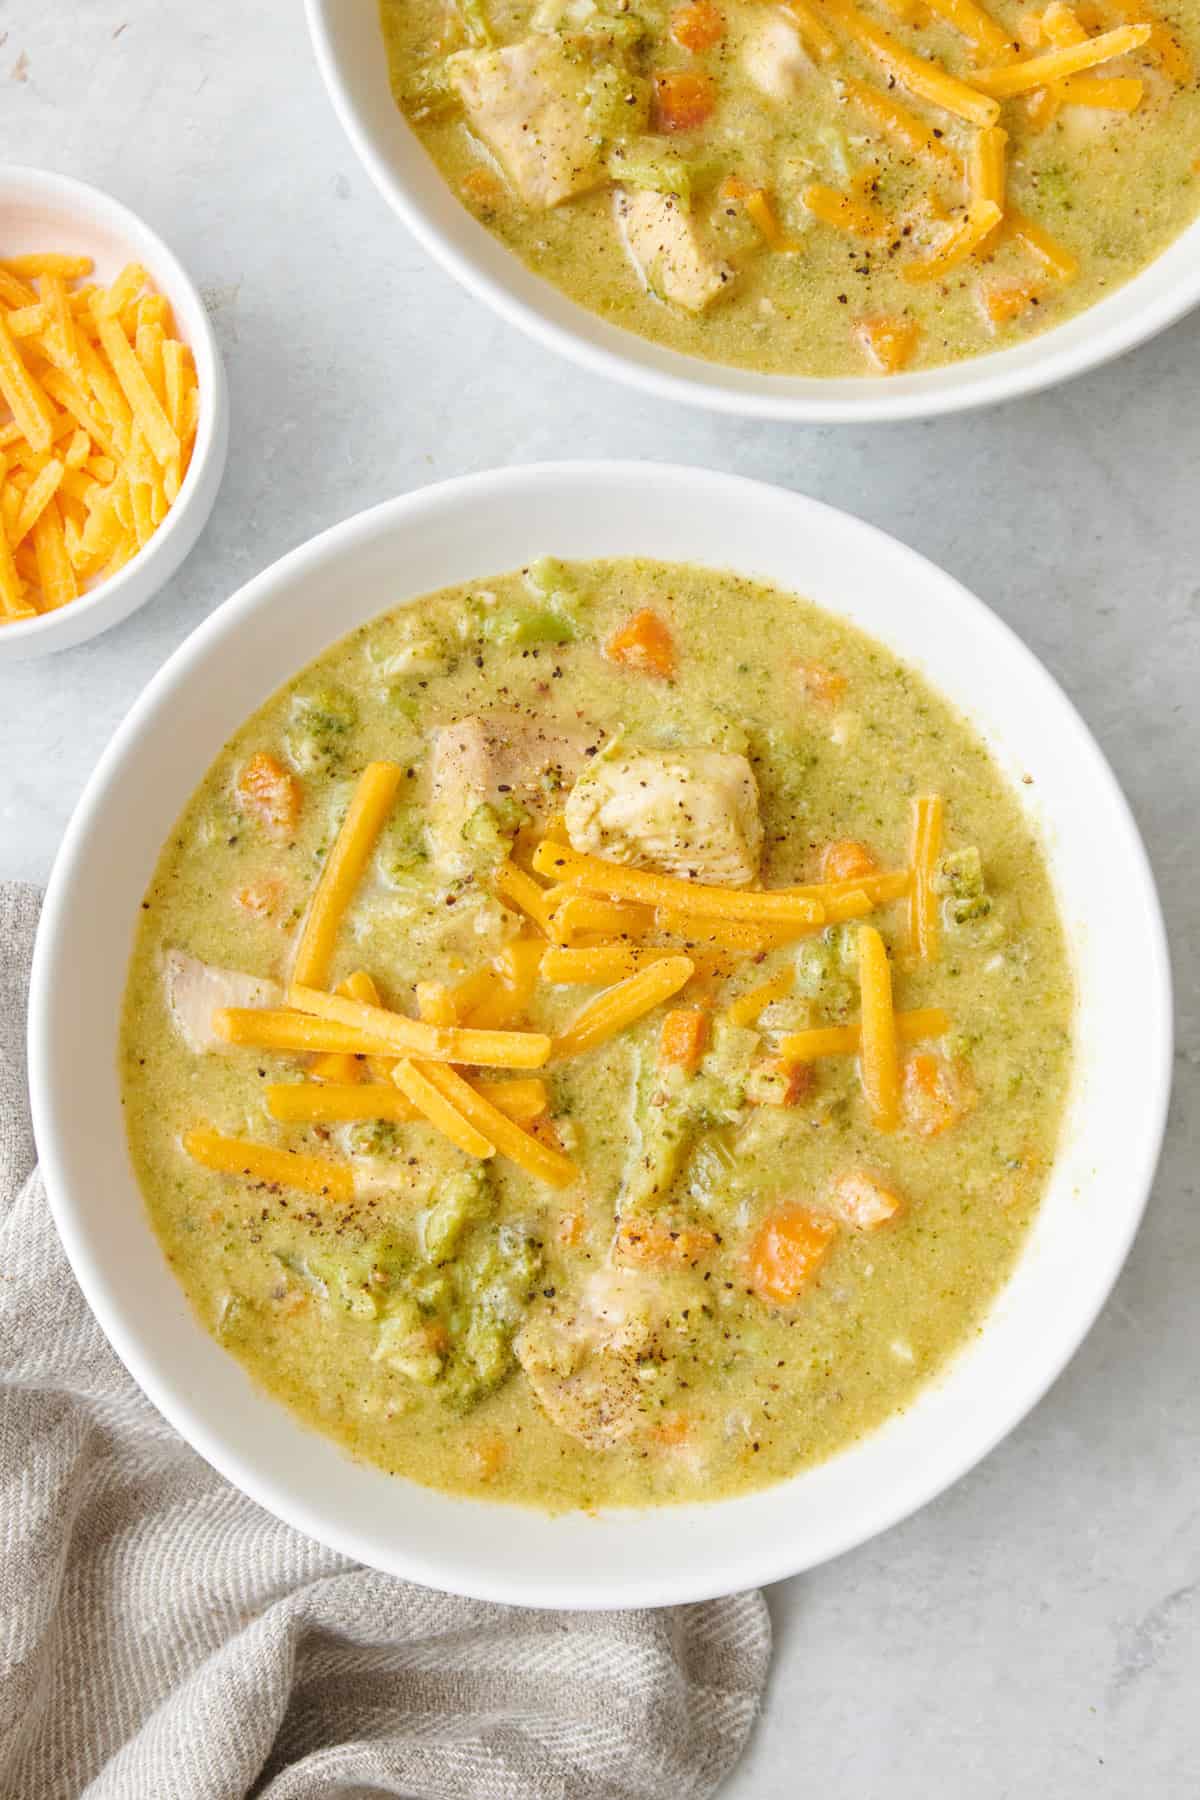 Two bowls of creamy chicken broccoli soup with shredded cheddar cheese on top.